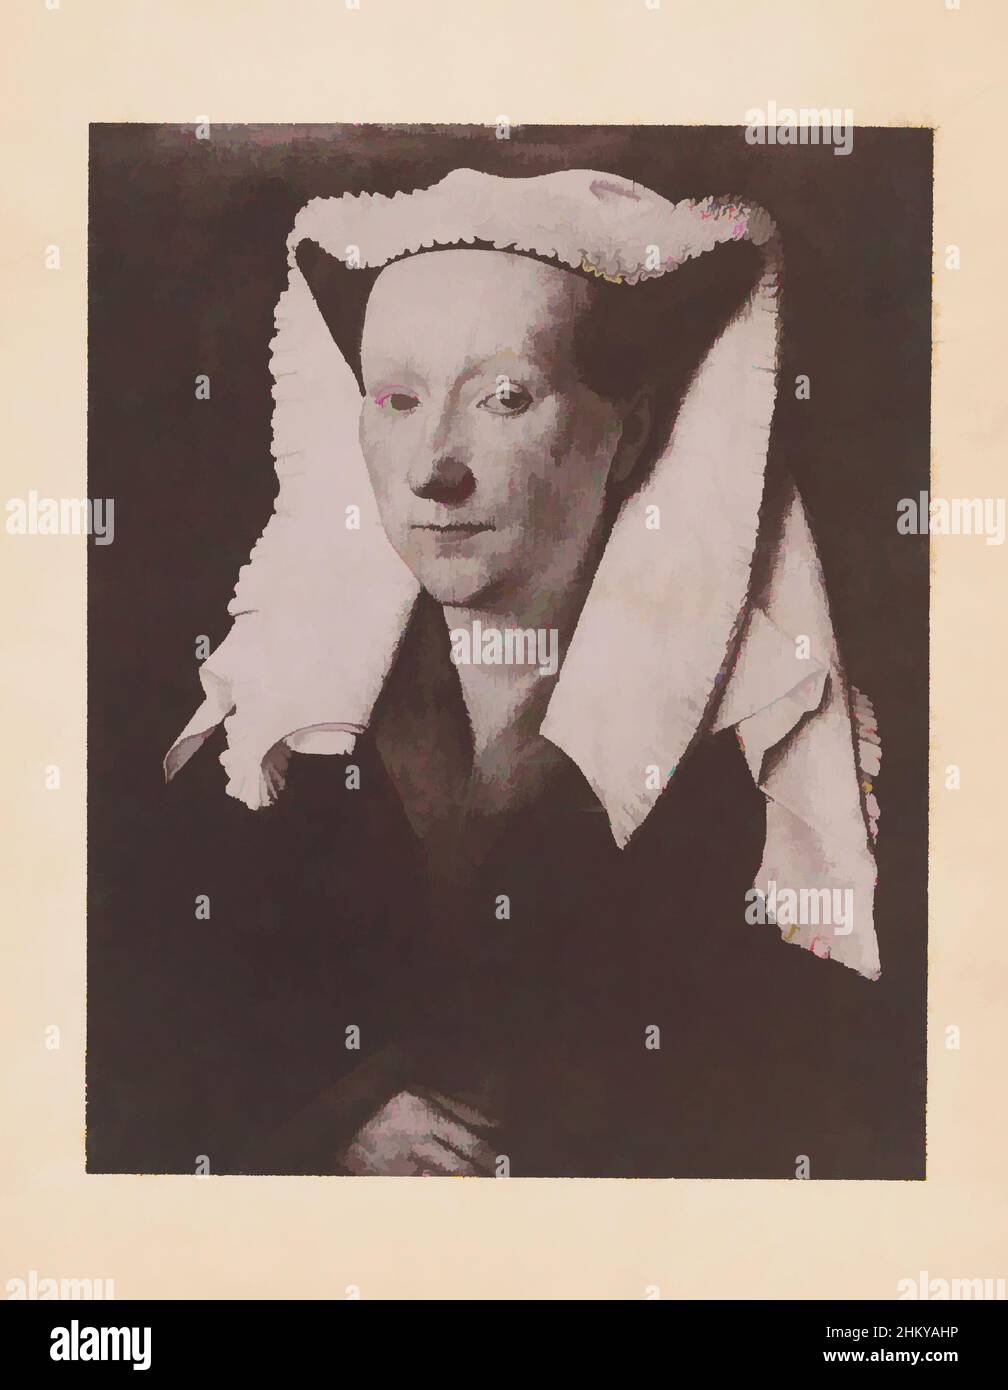 Art inspired by Photoreproduction of a painting, depicting a portrait of Margaretha van Eyck, maker:, after: Jan van Eyck, maker: Europeafter: Bruges, c. 1875 - c. 1900, paper, collotype, height 190 mm × width 150 mm, Classic works modernized by Artotop with a splash of modernity. Shapes, color and value, eye-catching visual impact on art. Emotions through freedom of artworks in a contemporary way. A timeless message pursuing a wildly creative new direction. Artists turning to the digital medium and creating the Artotop NFT Stock Photo